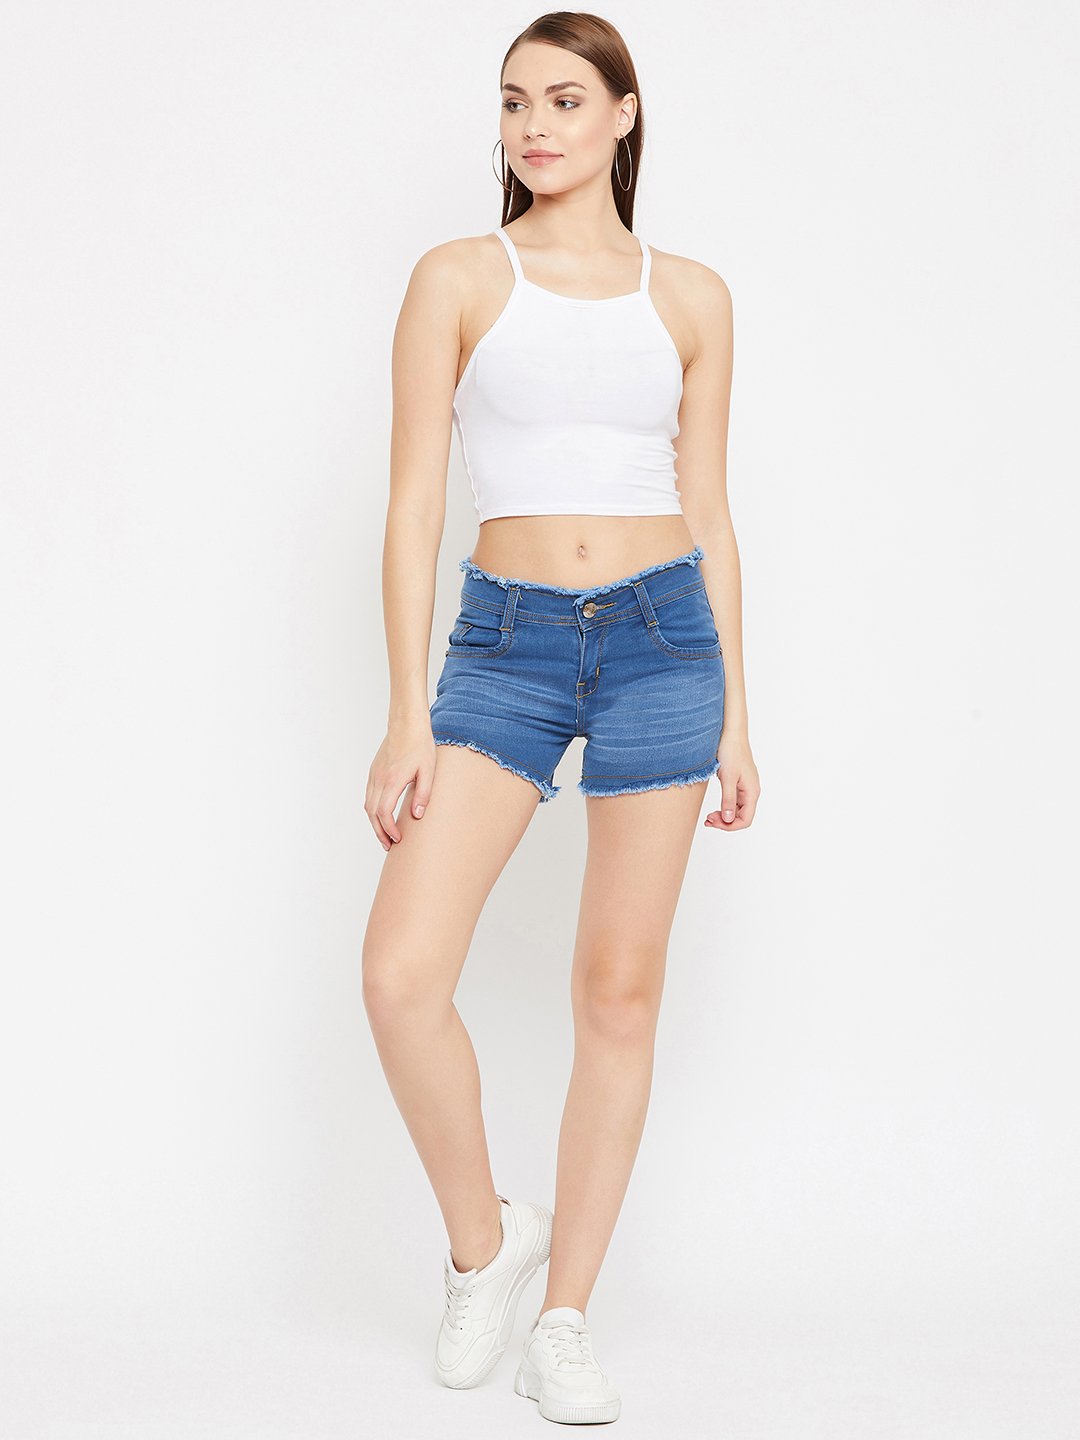 Stretchable with whiskers Bata Blue Shorts - NiftyJeans